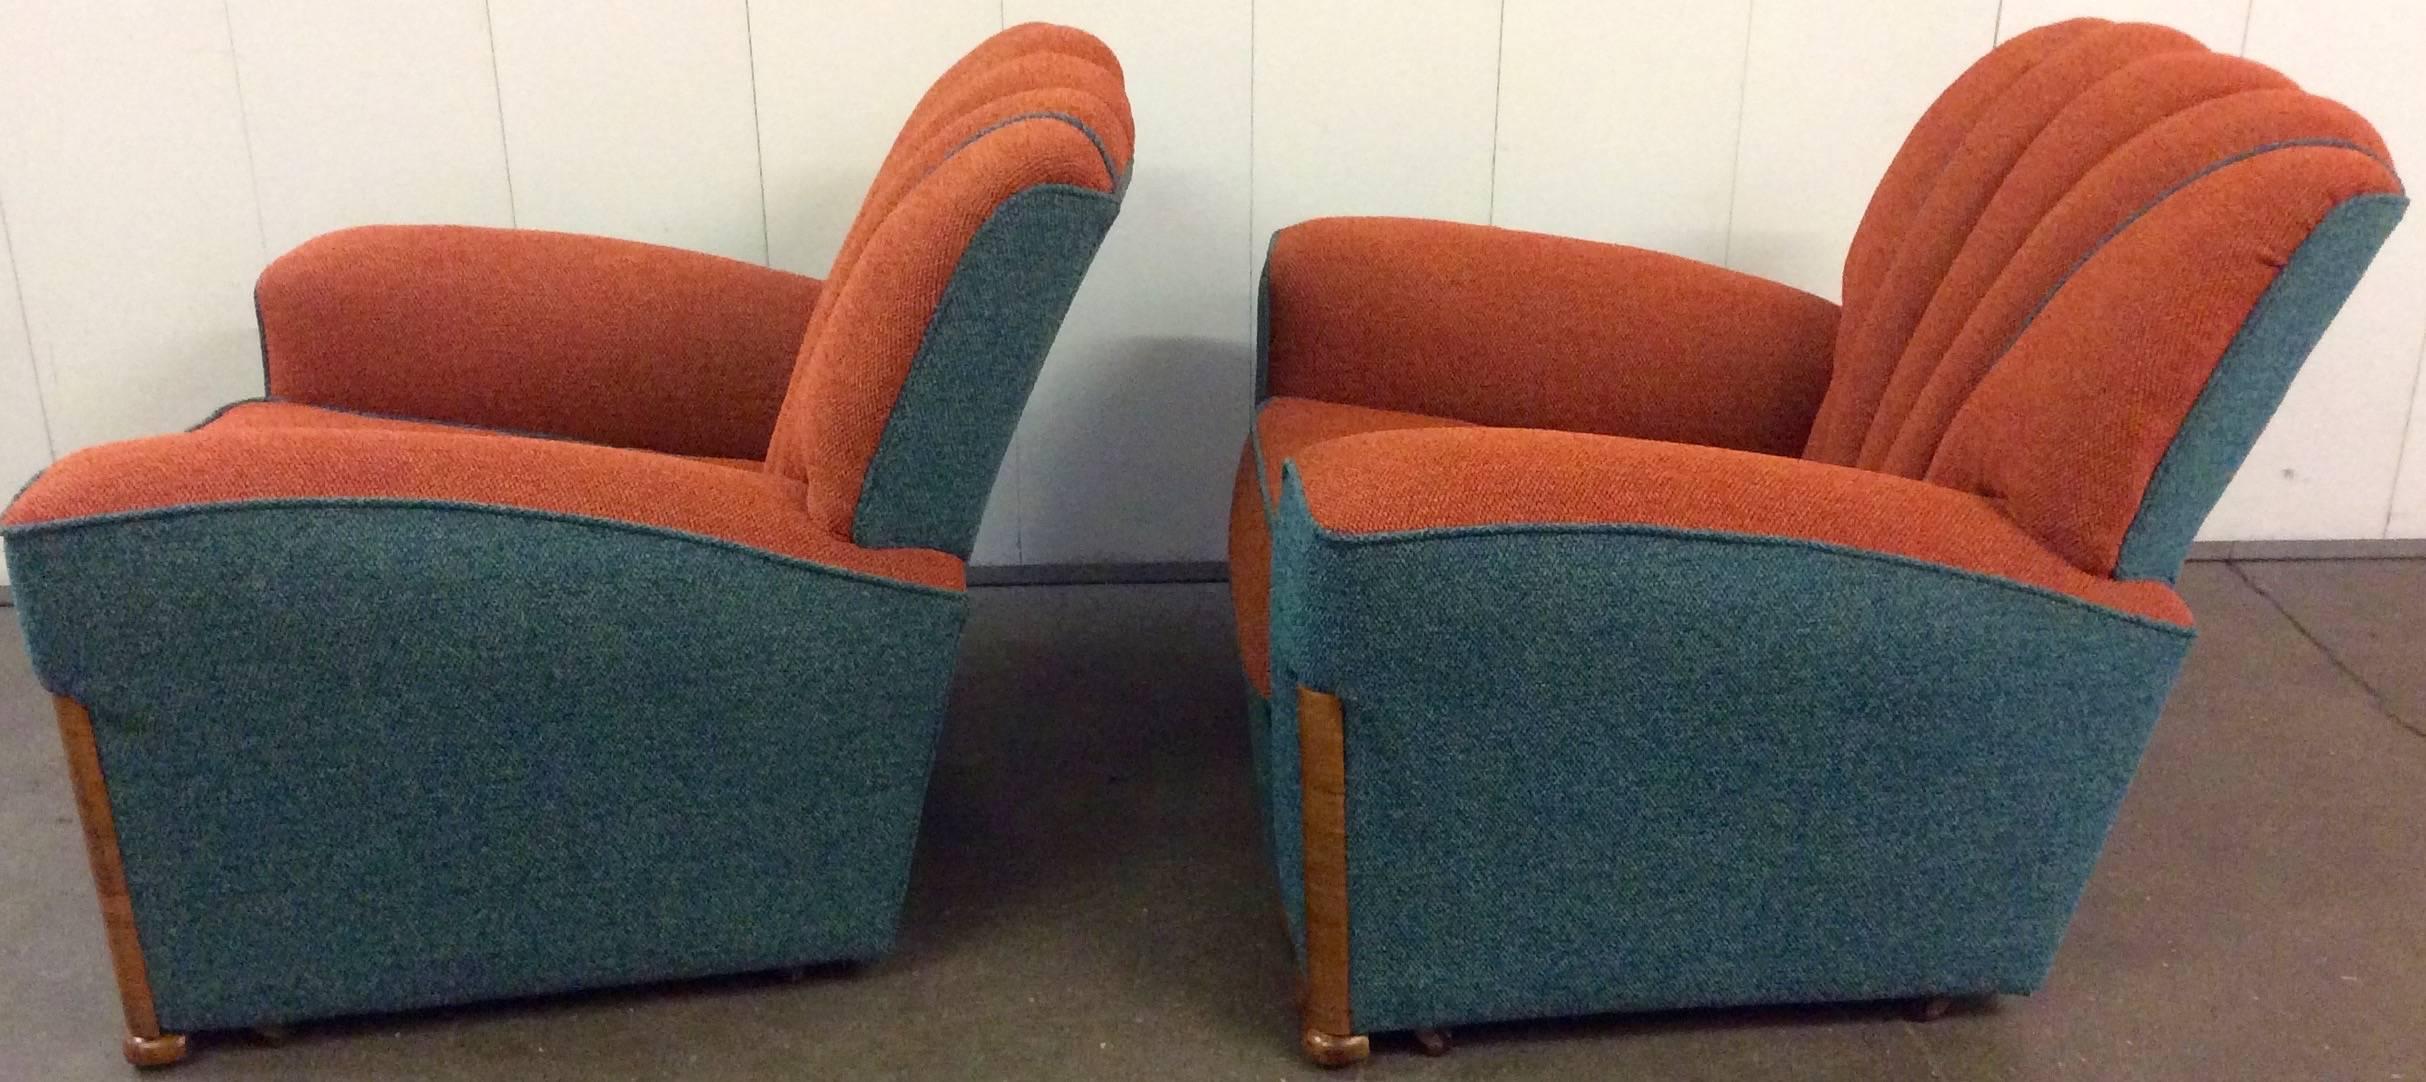 Beautiful Art Deco shell back pair of armchairs, smartly re upholstered in a contrasting Moquette fabrics. Walnut trims. Measures: Chairs 82 cm H, 92 cm W, 94 cm D, seat is 41 cm H 61 cm D.
British, circa 1930.